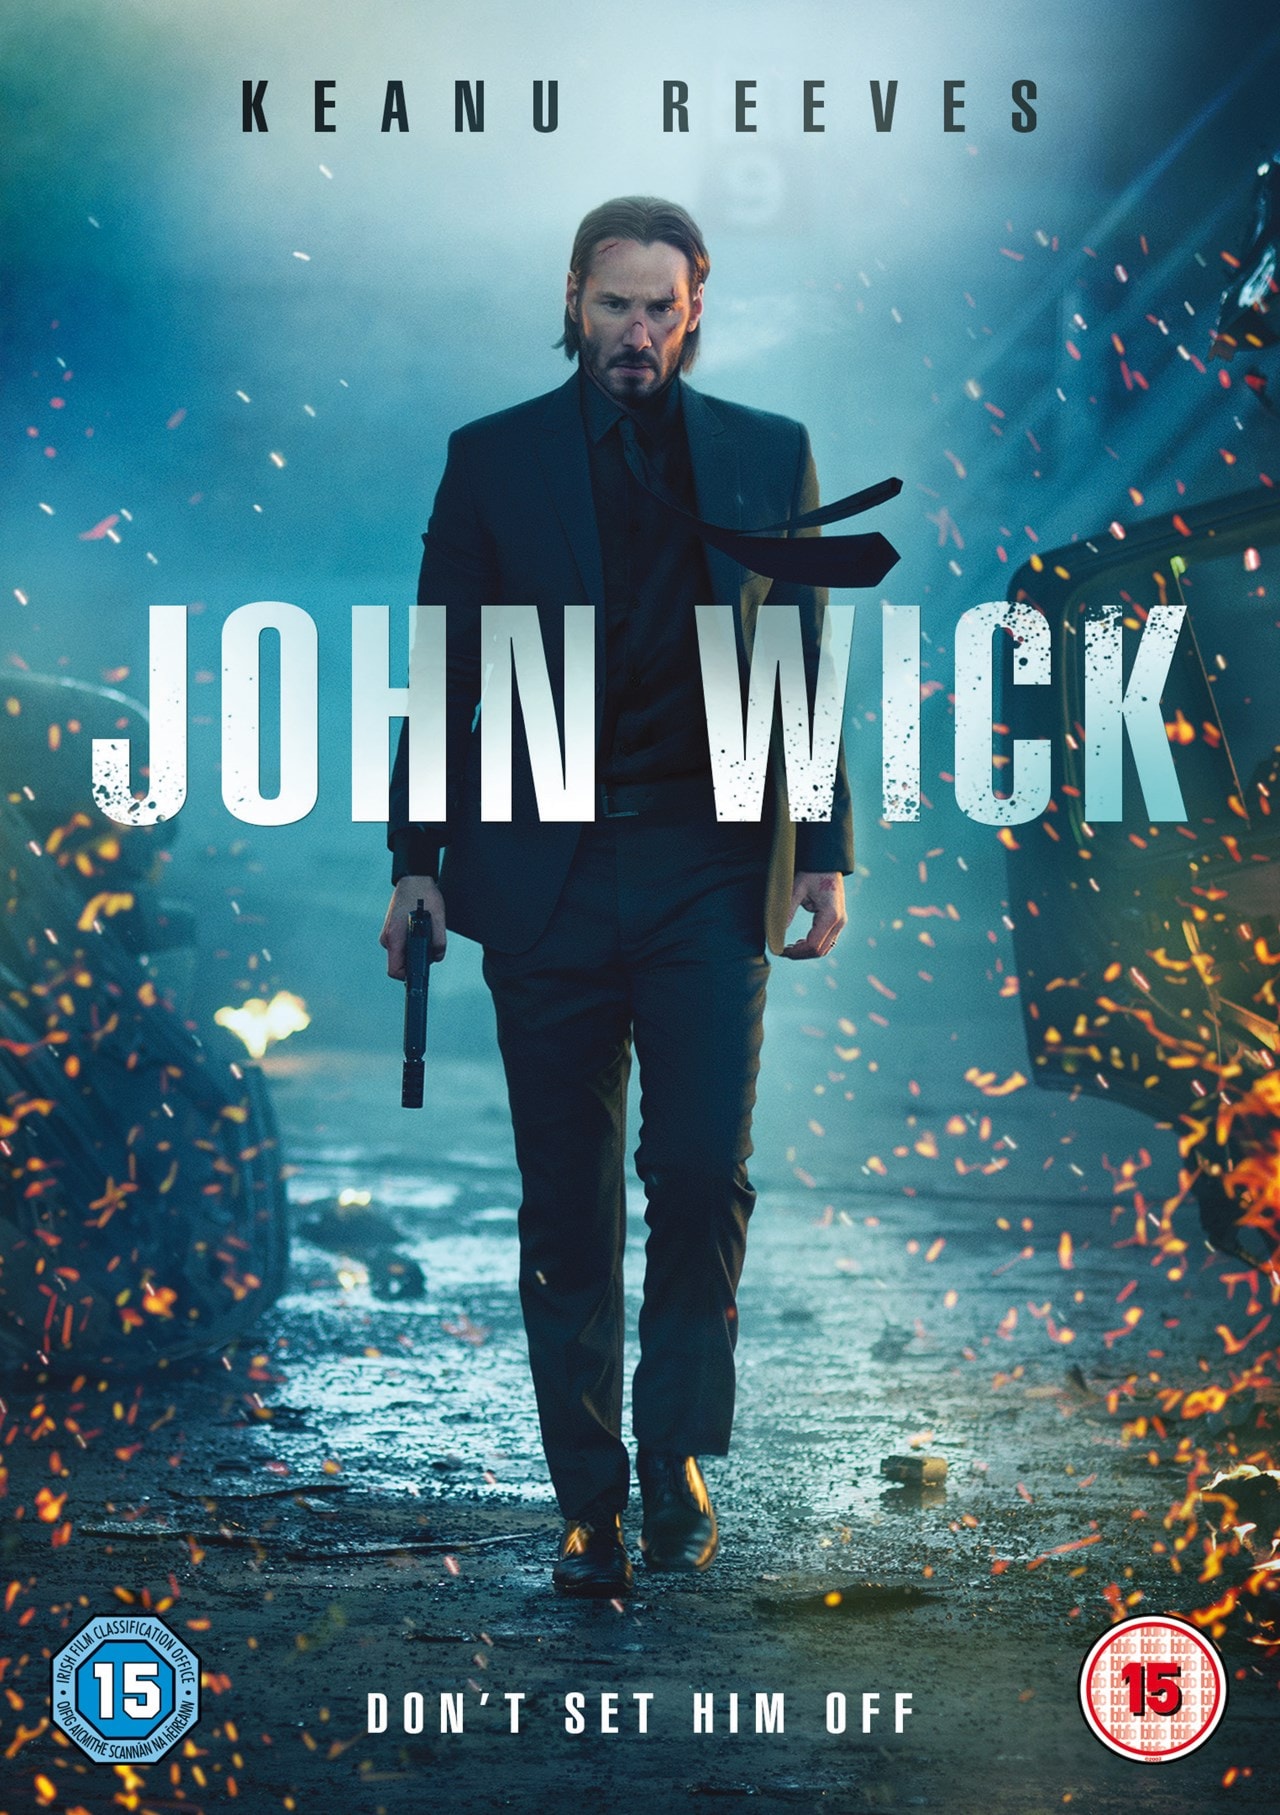 is there going to be a john wick 2 movie